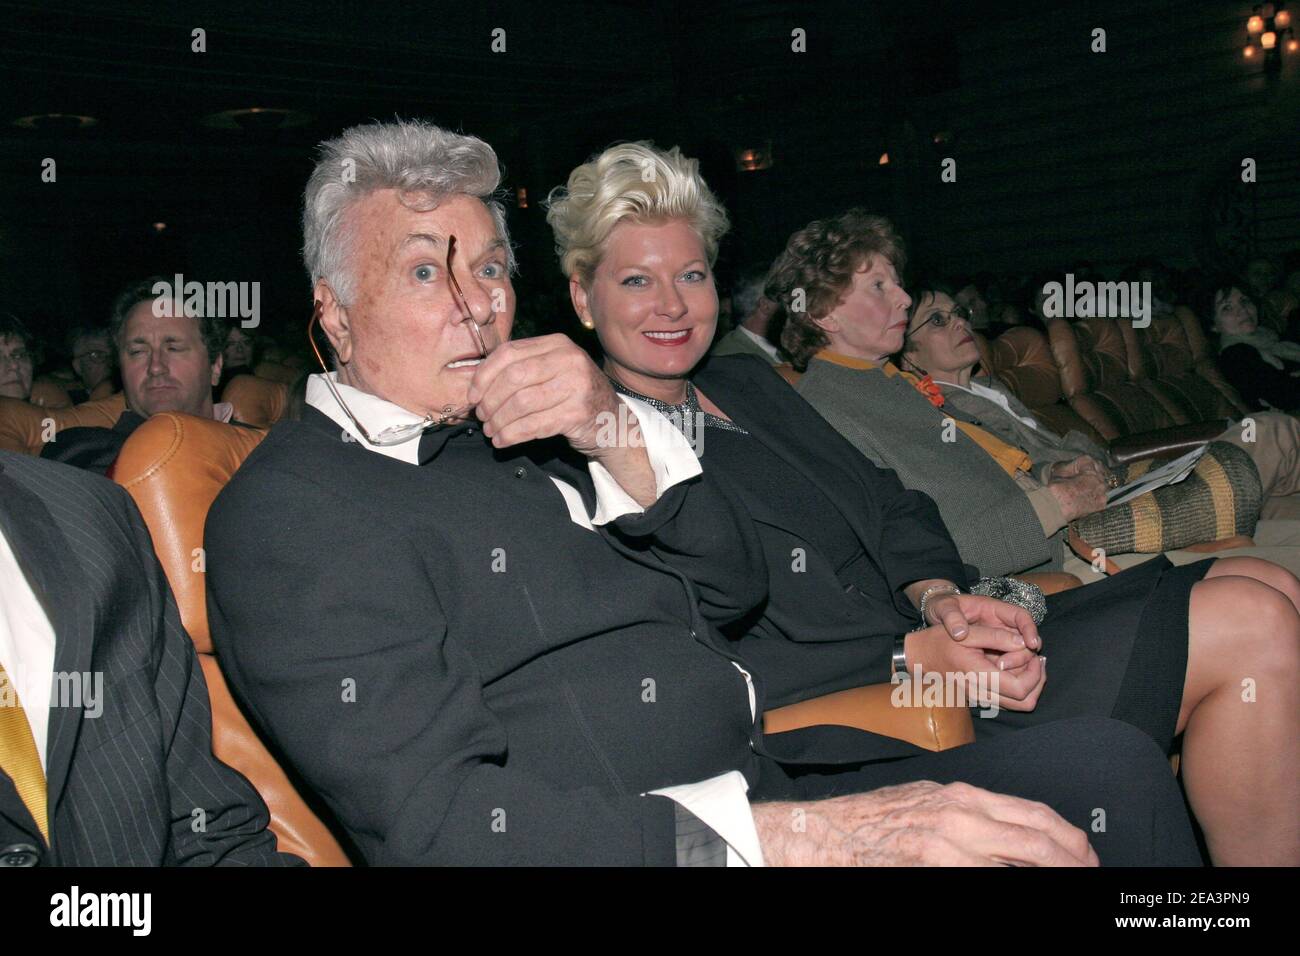 U.S. actor Tony Curtis and his wife Jill Vandenberg attend the closing ceremony of the 13th 'Jules Verne Film Festival' held at the Grand Rex cinema in Paris, France on April 10, 2005. The 2005 festival's edition commemorates the 100th anniversary of French science fiction author Jules Verne's death. Photo by Benoit Pinguet/ABACA. Stock Photo